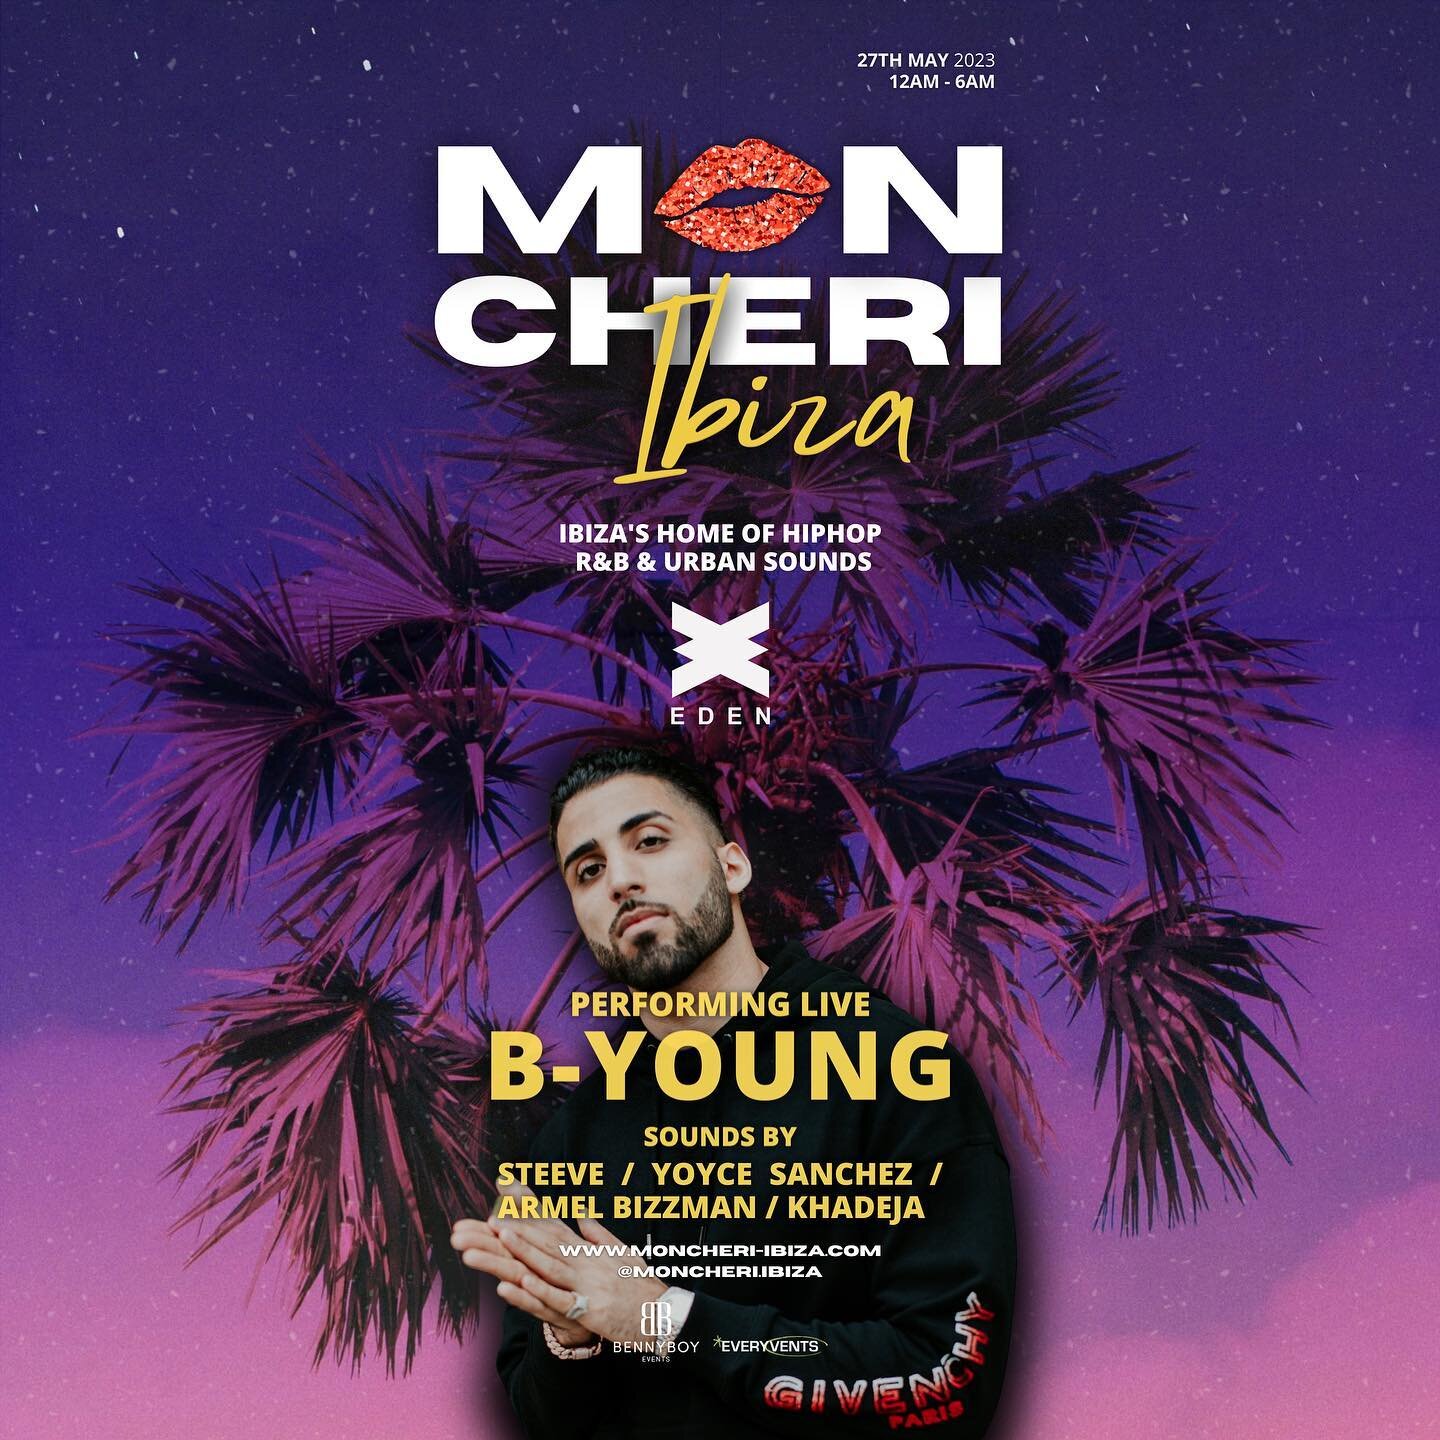 B YOUNG LIVE ! ✨🎤 📢

The International Superstar Is Flying Into Ibiza 🇪🇸On The 27TH May To Shutdown Our Opening Party ! 🔥Hope You Ready !😮&zwj;💨

Starting This Season With A Bang 🔥 079 A Friend And Let Them Know 📲 M💋N CHERI IBIZA Is Back &a